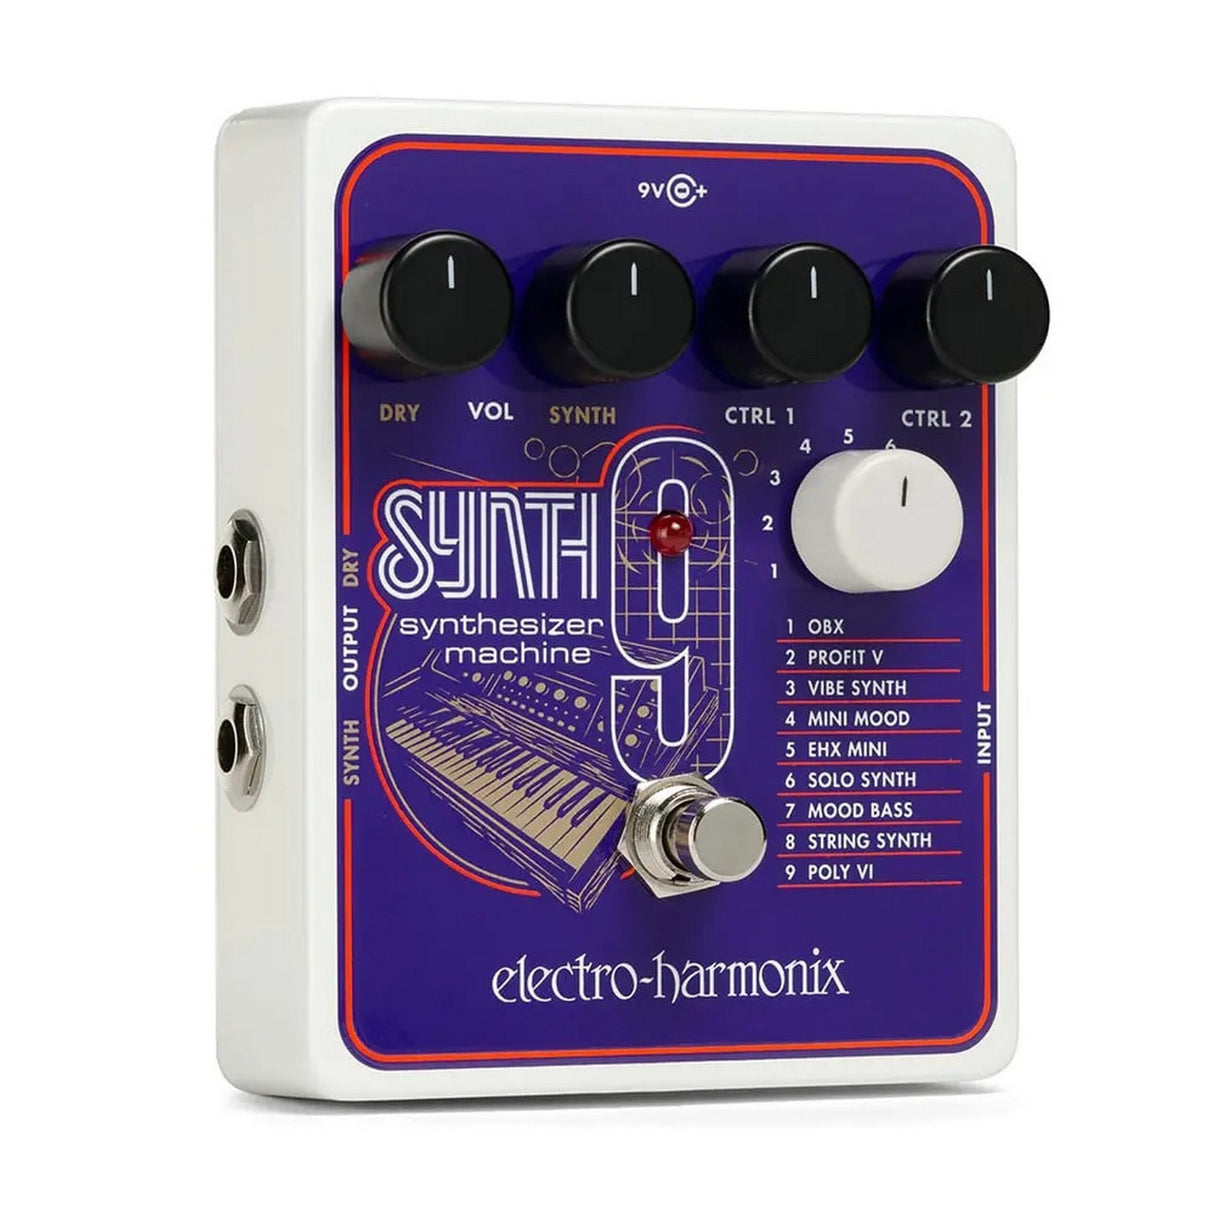 Electro-Harmonix Synth 9 Synthesizer Machine Guitar Effects Pedal